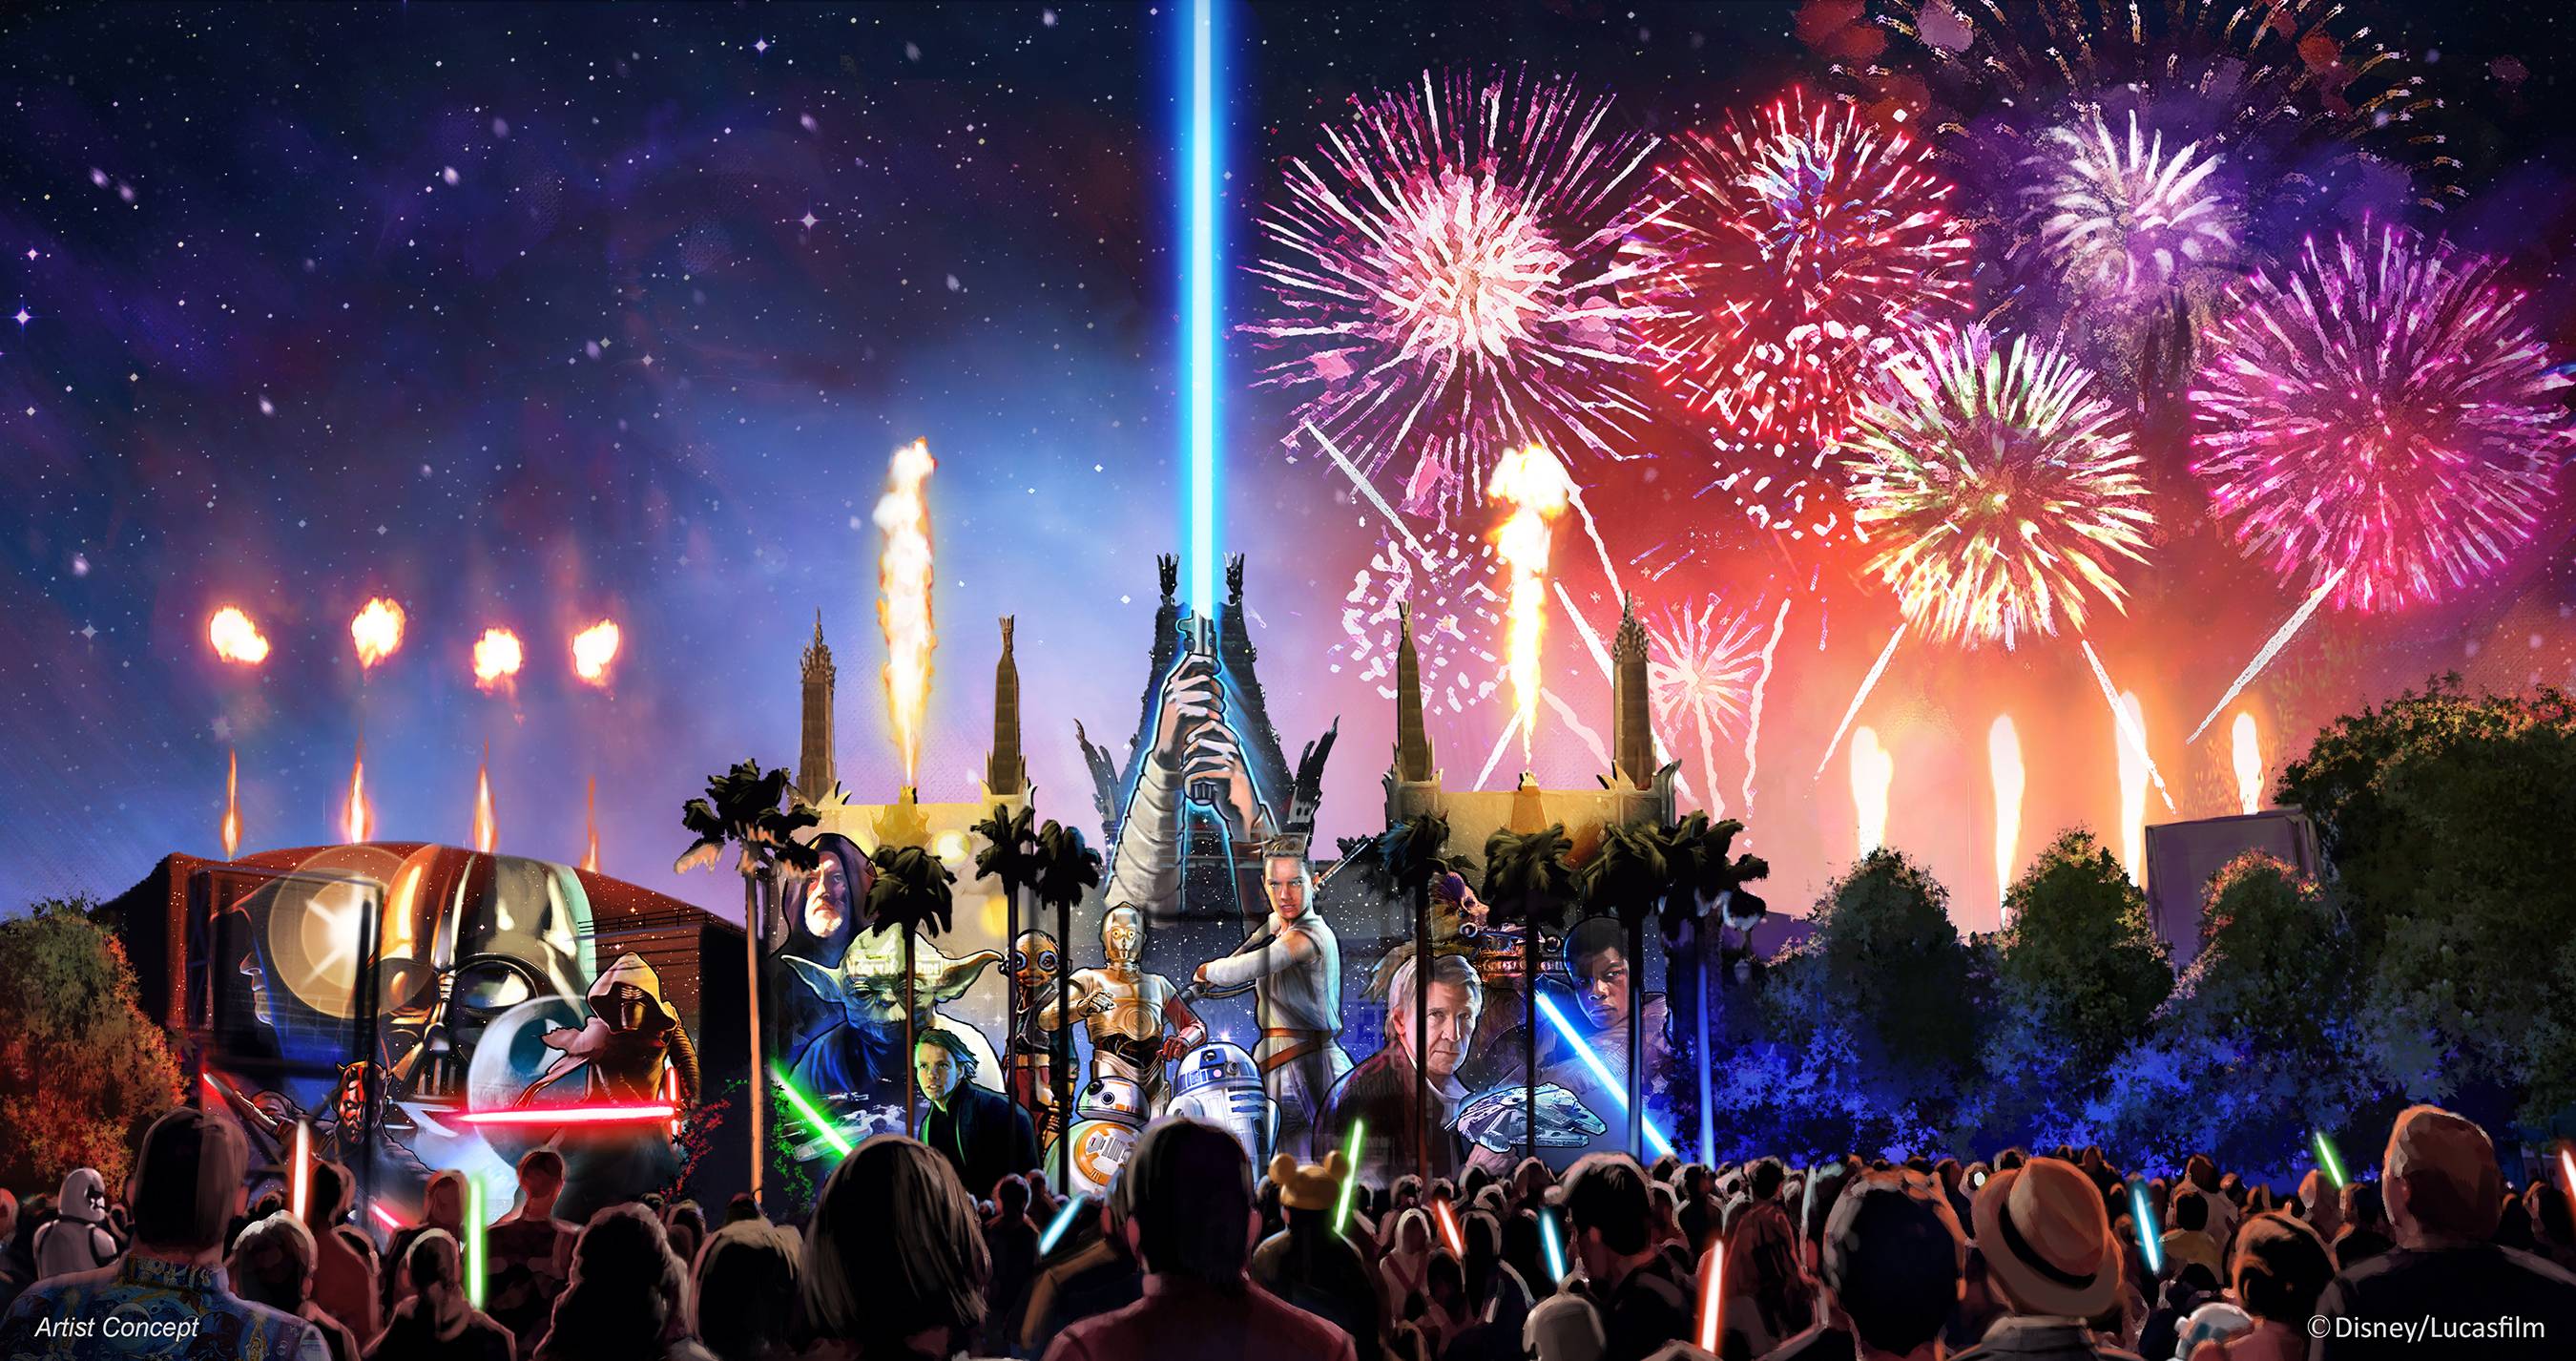 Star Wars: A Galactic Spectacular to feature new scenes from Star Wars: The Rise of Skywalker